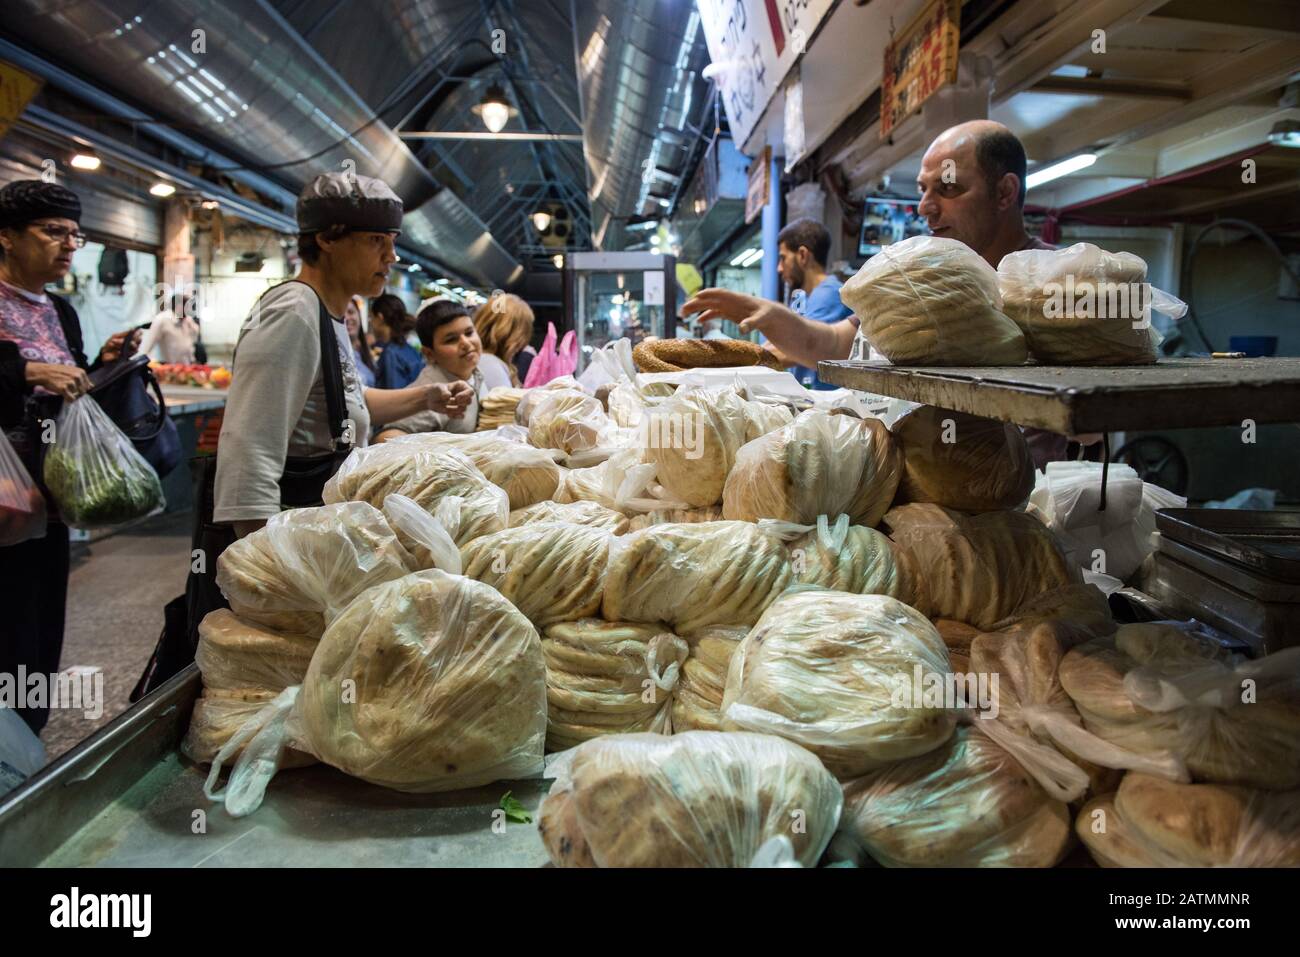 JERUSALEM, ISRAEL - MAY 15, 2016: Tourists and local Jewish people buying bread at the local market of the Holy city, the Machane Yehuda Stock Photo